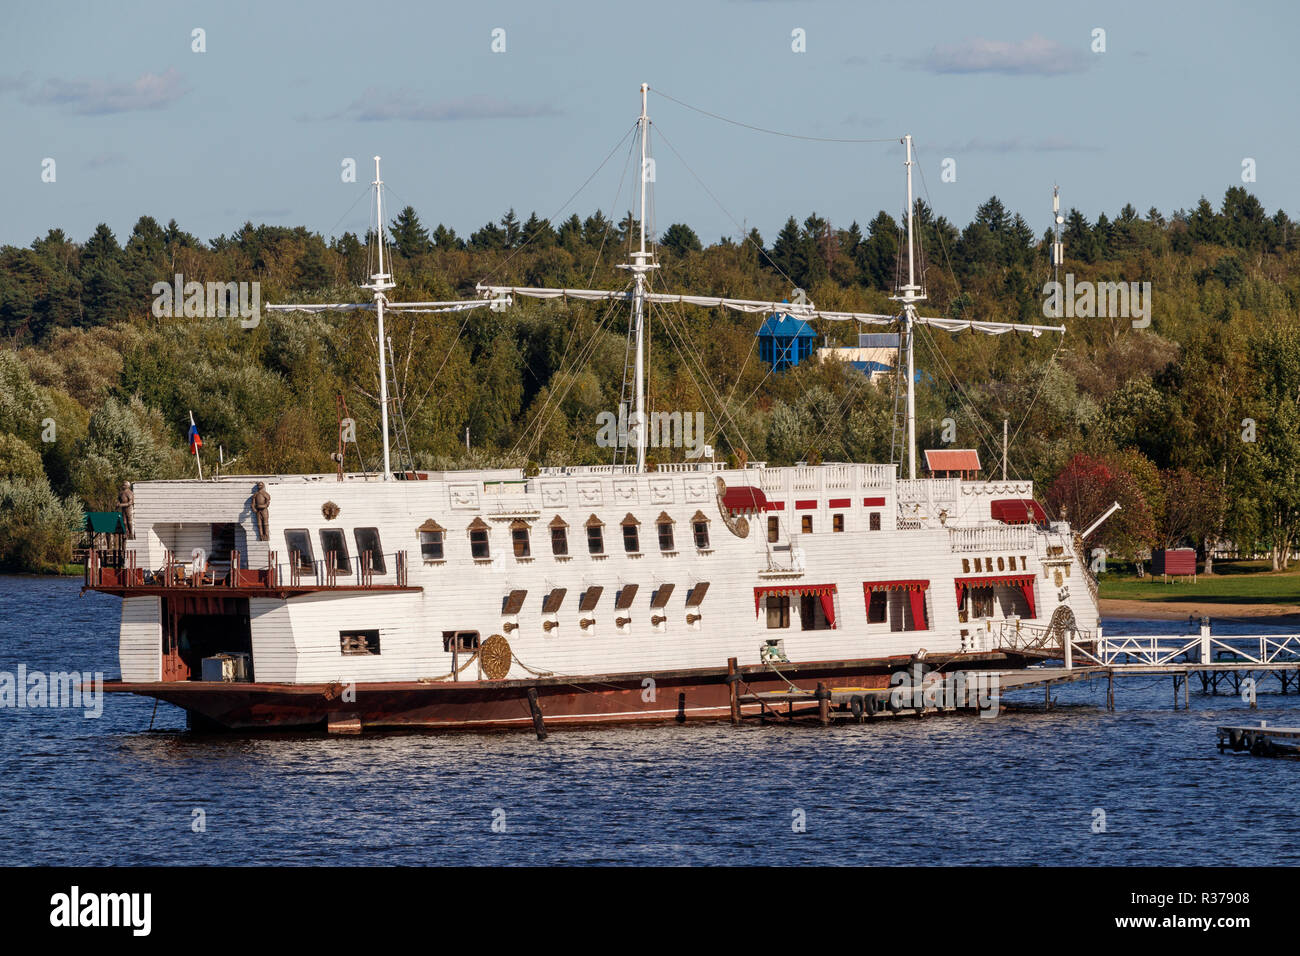 The Vikont banqueting and restaurant ship on the Moscow Canal, Moscow, Russia. Stock Photo